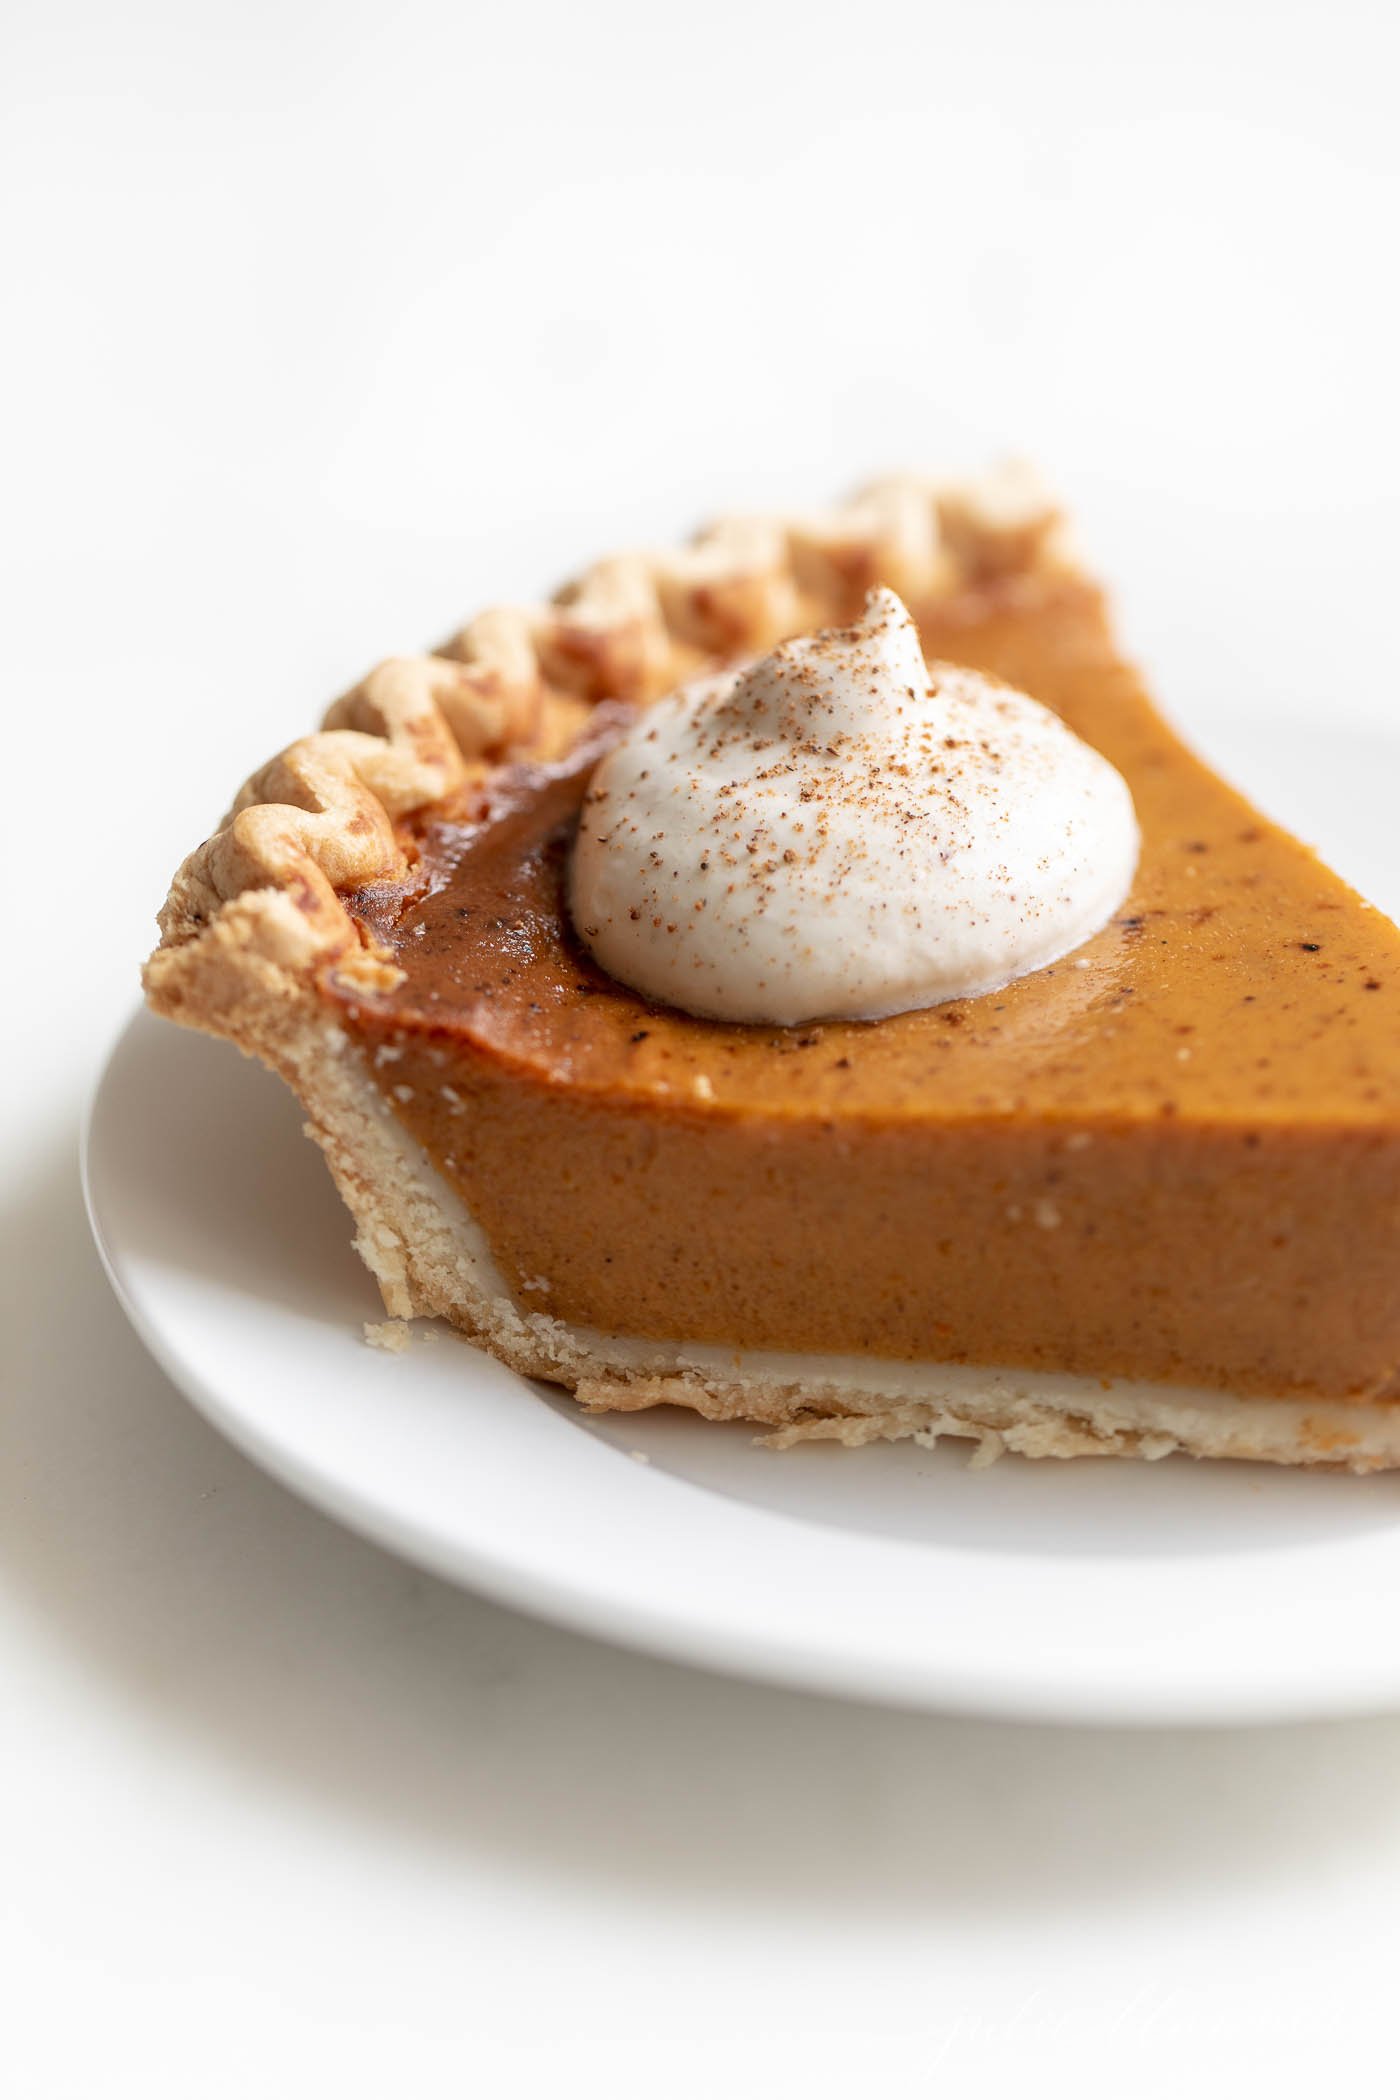 A slice of pumpkin pie with a dollop of eggnog whipped cream on top.